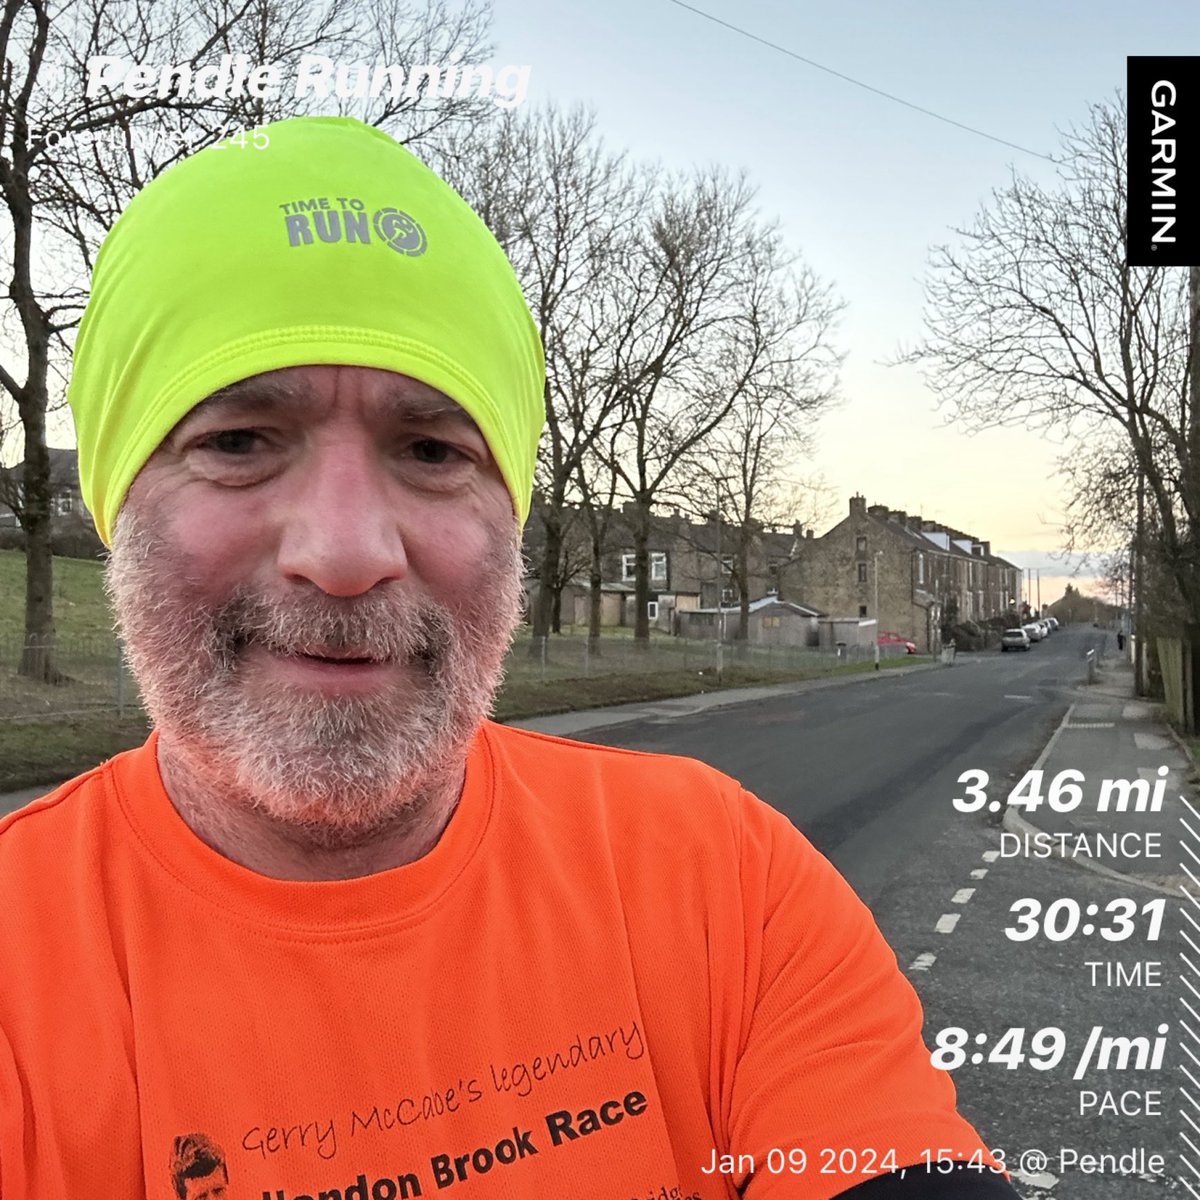 Be ‘Eck!! That Were Cawd 🥶🥶🥶 Blew the cobwebs away. First of the year #runhappy #beawesome #ukrunchat #redfoxrunclub #headspace 👊🏃🏻‍♂️🏃🏻‍♂️👊 #beatyesterday